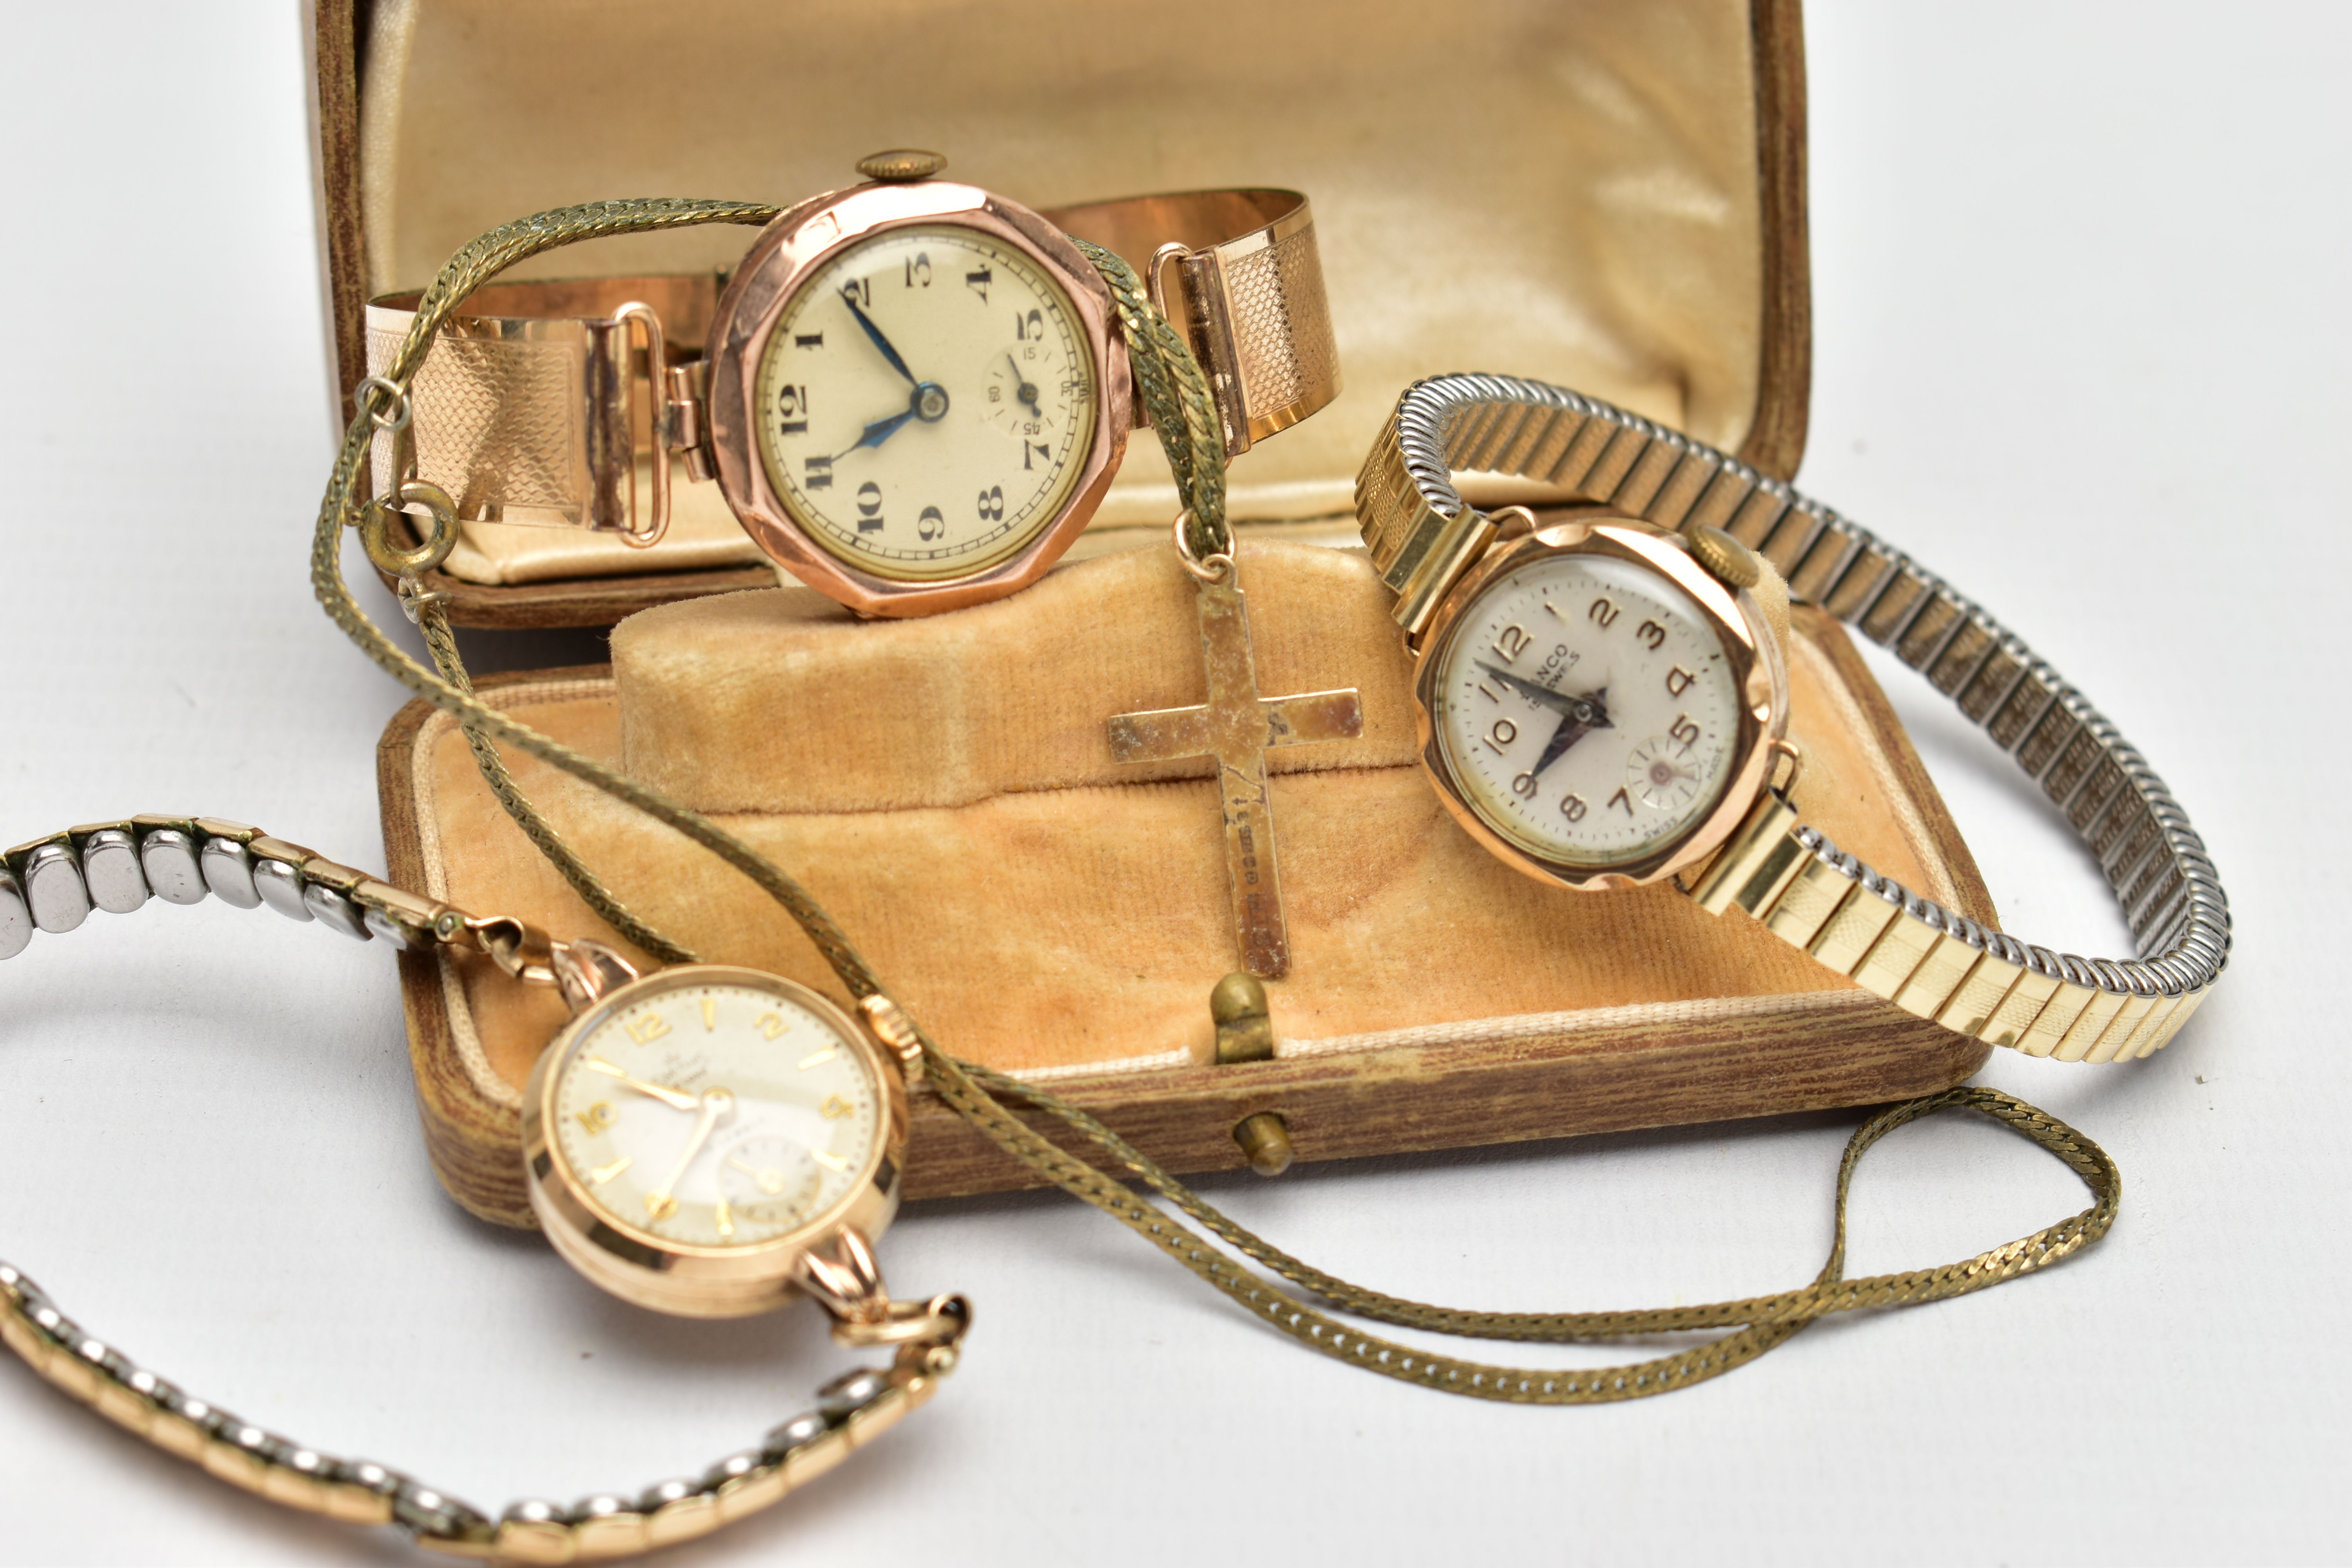 THREE LADIES WRISTWATCHES, the first a boxed 'Lanco' gold head wristwatch, hand wound movement, - Image 6 of 7